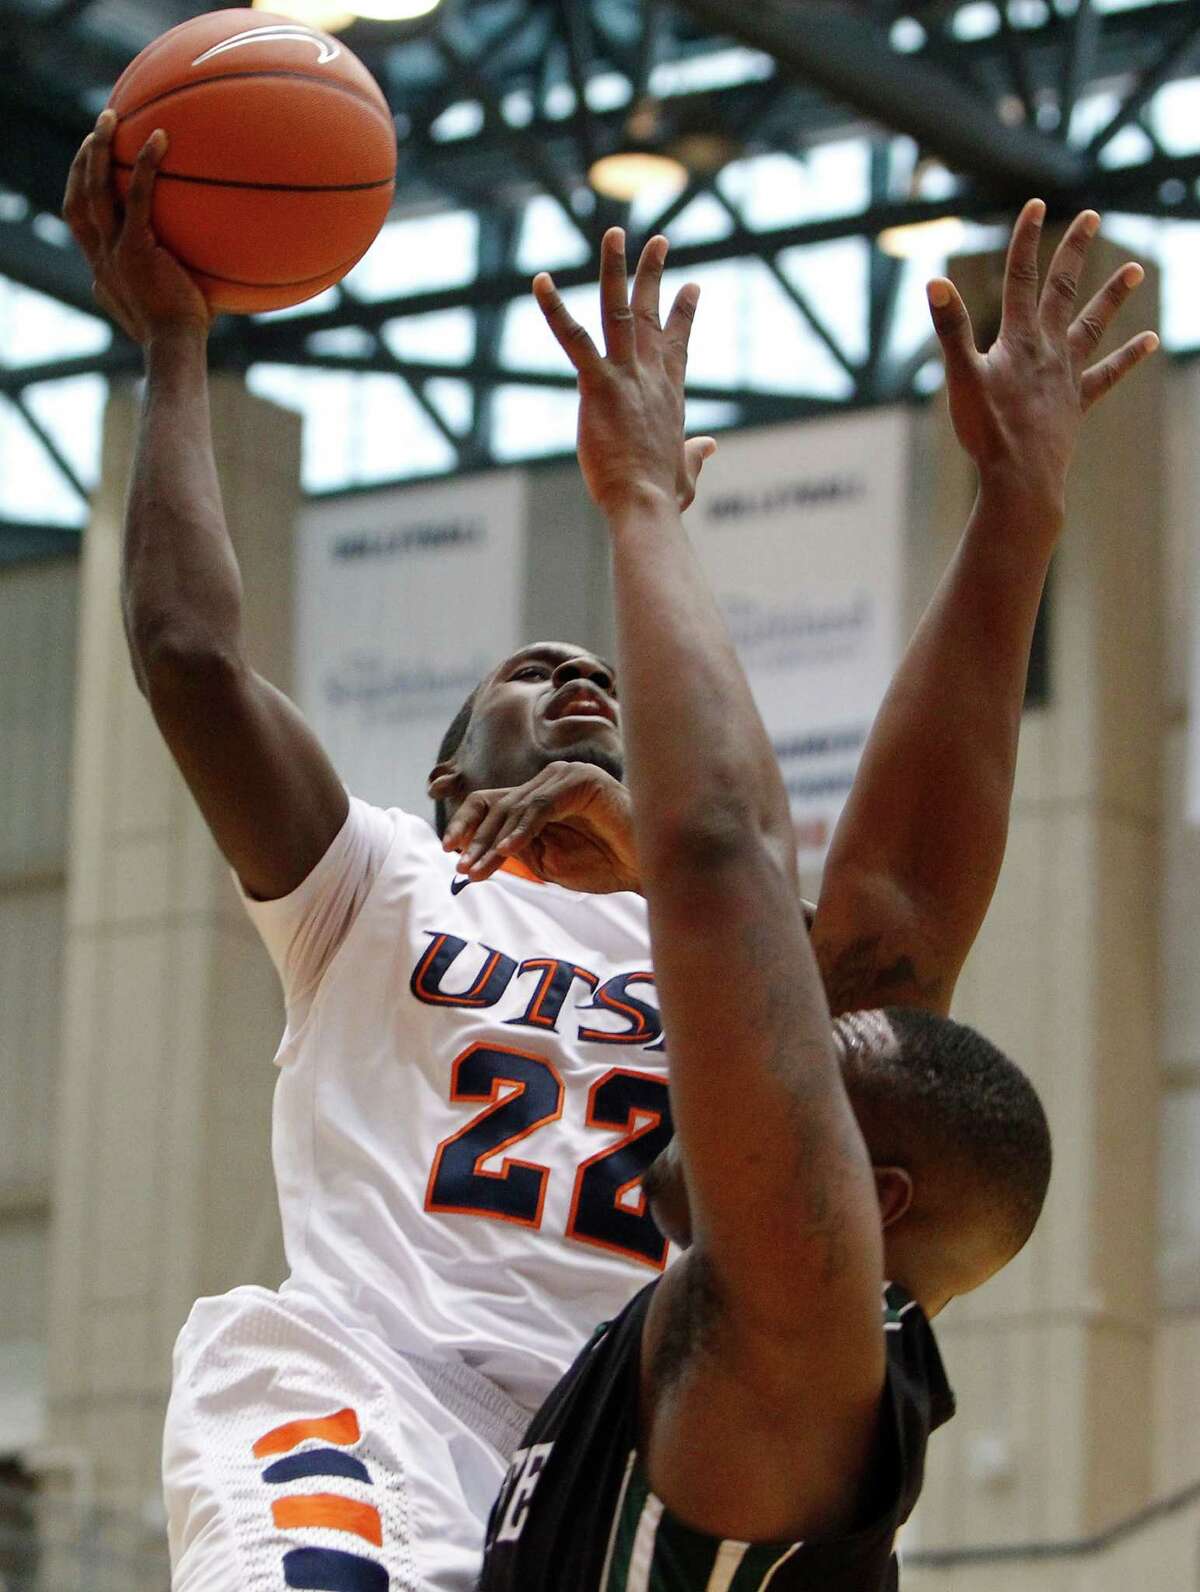 UTSA's Kannon Burrage shoots over the South Carolina Upstate defense during first half action at UTSA's Convocation Center on Saturday, Nov. 17, 2012. MICHAEL MILLER / FOR THE EXPRESS-NEWS